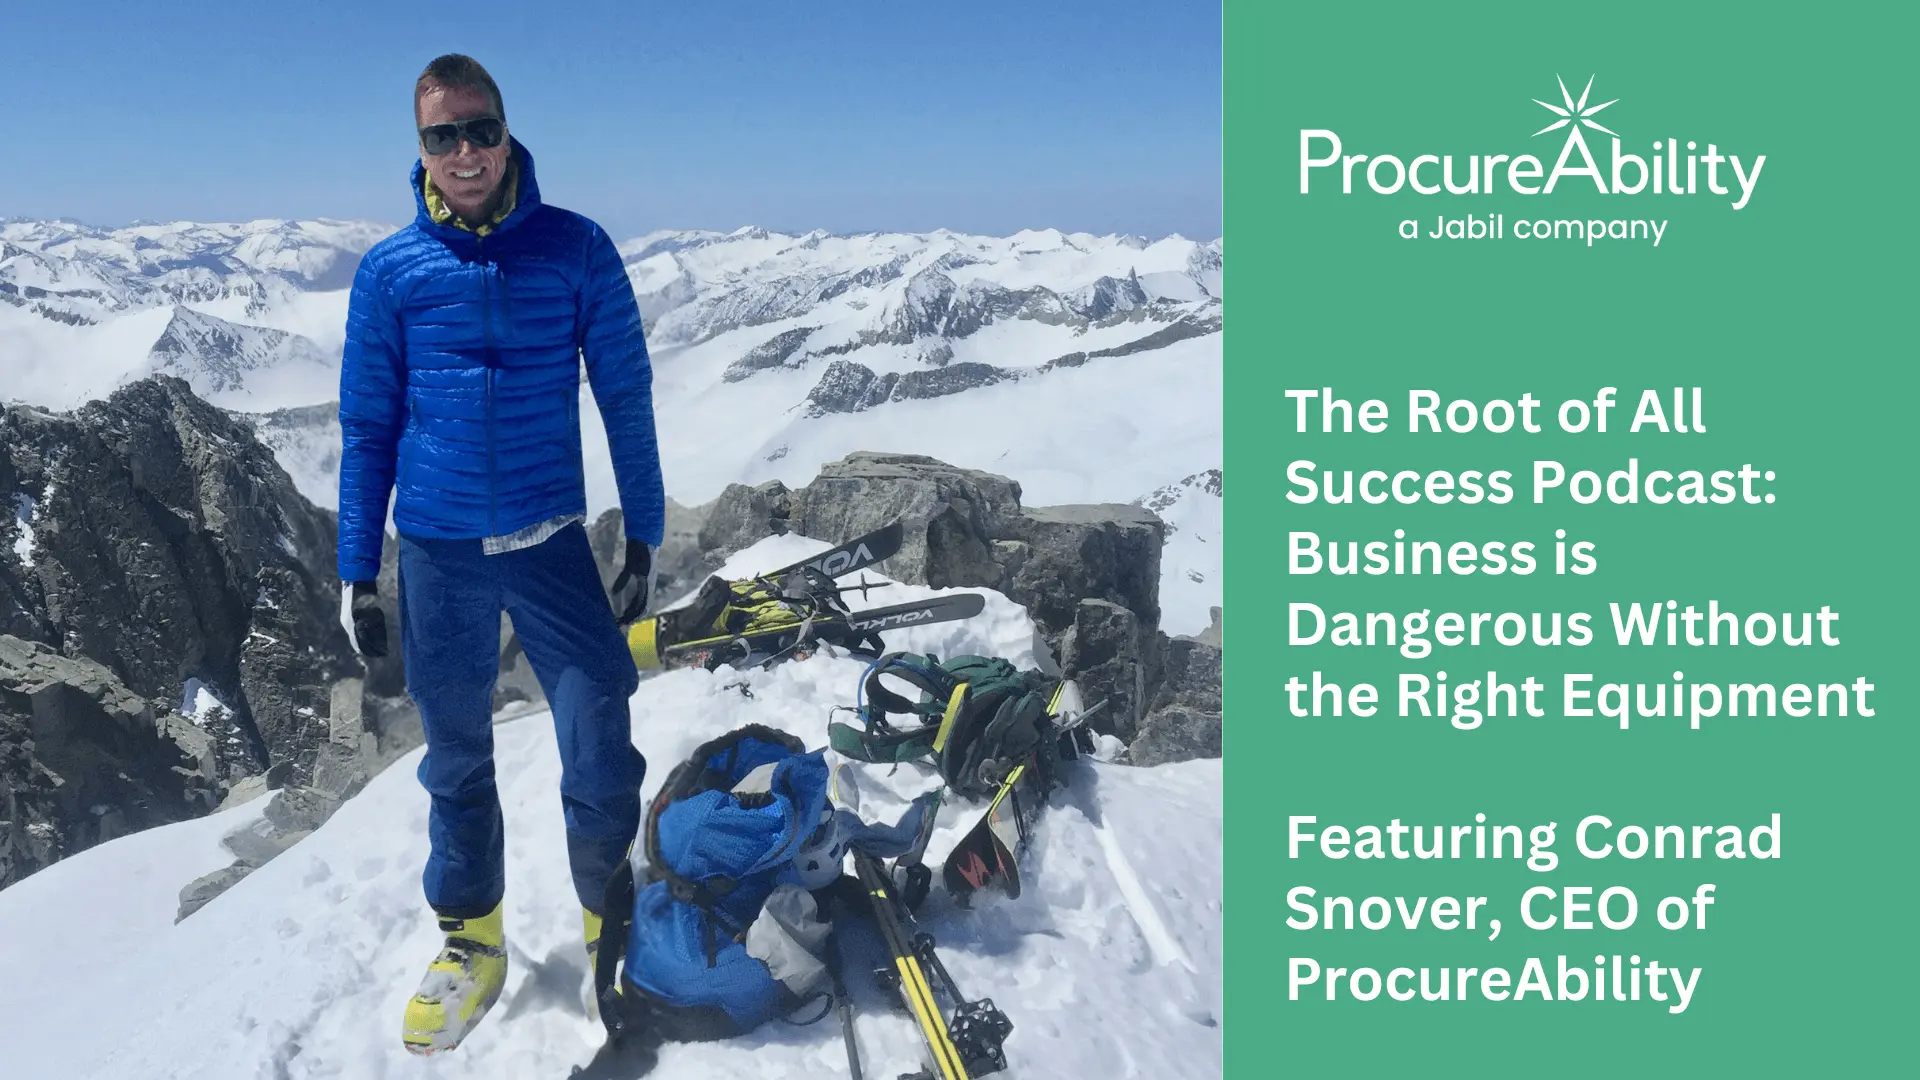 The Root of All Success Podcast: Business is Dangerous Without the Right Equipment Featuring Conrad Snover, CEO of ProcureAbility